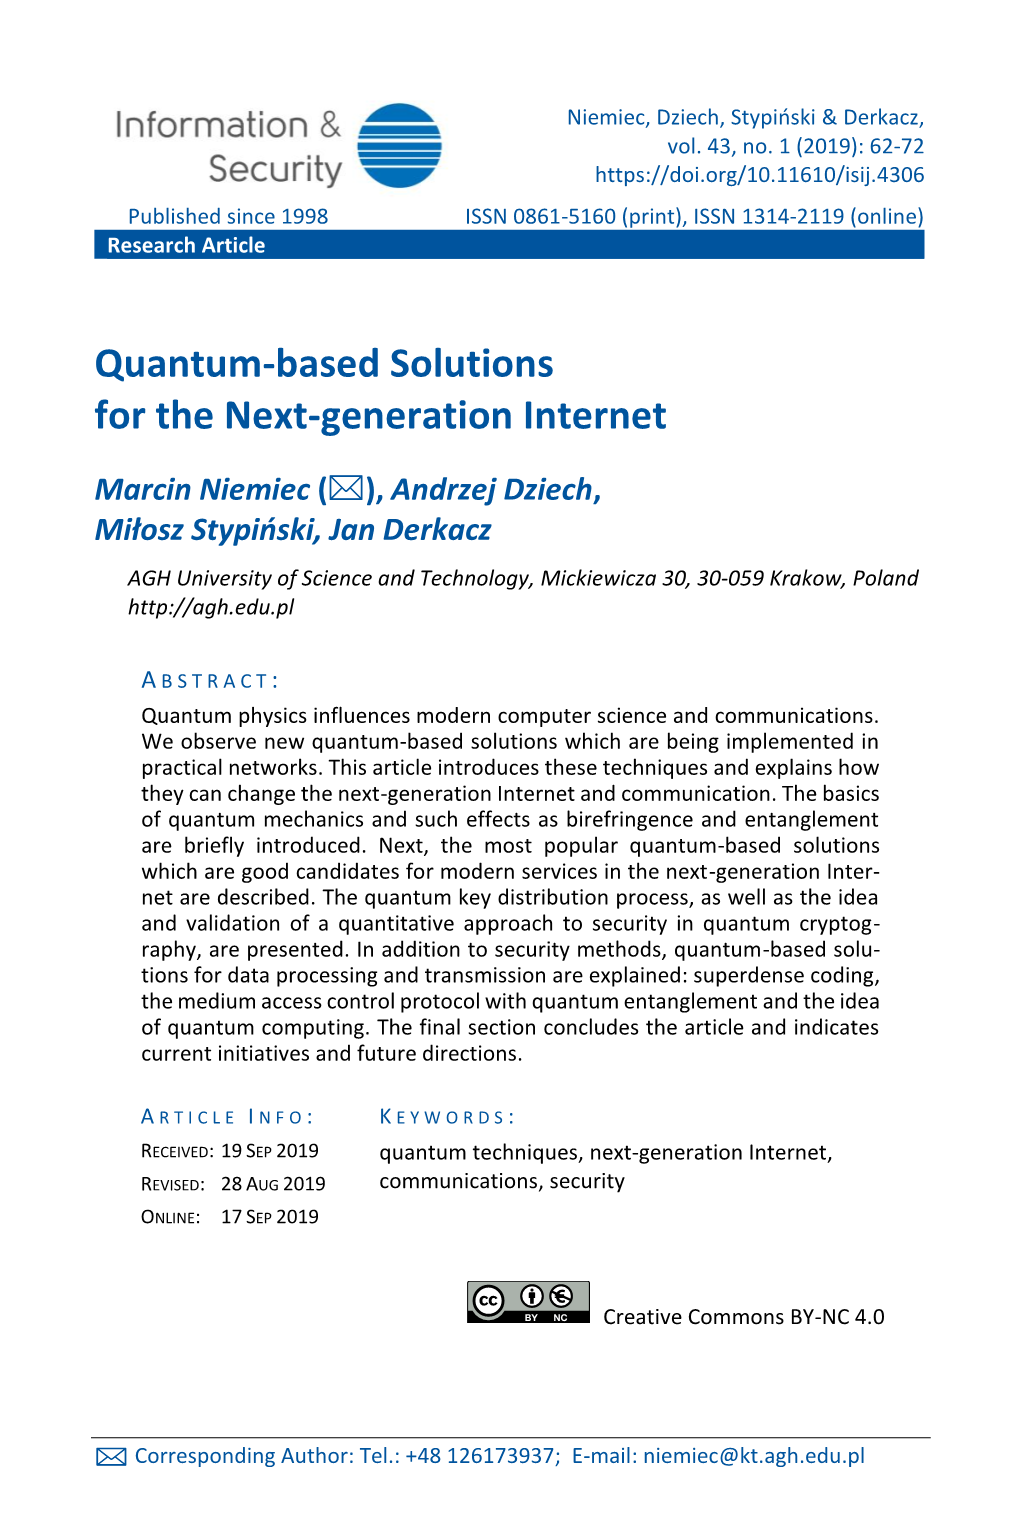 Quantum-Based Solutions for the Next-Generation Internet